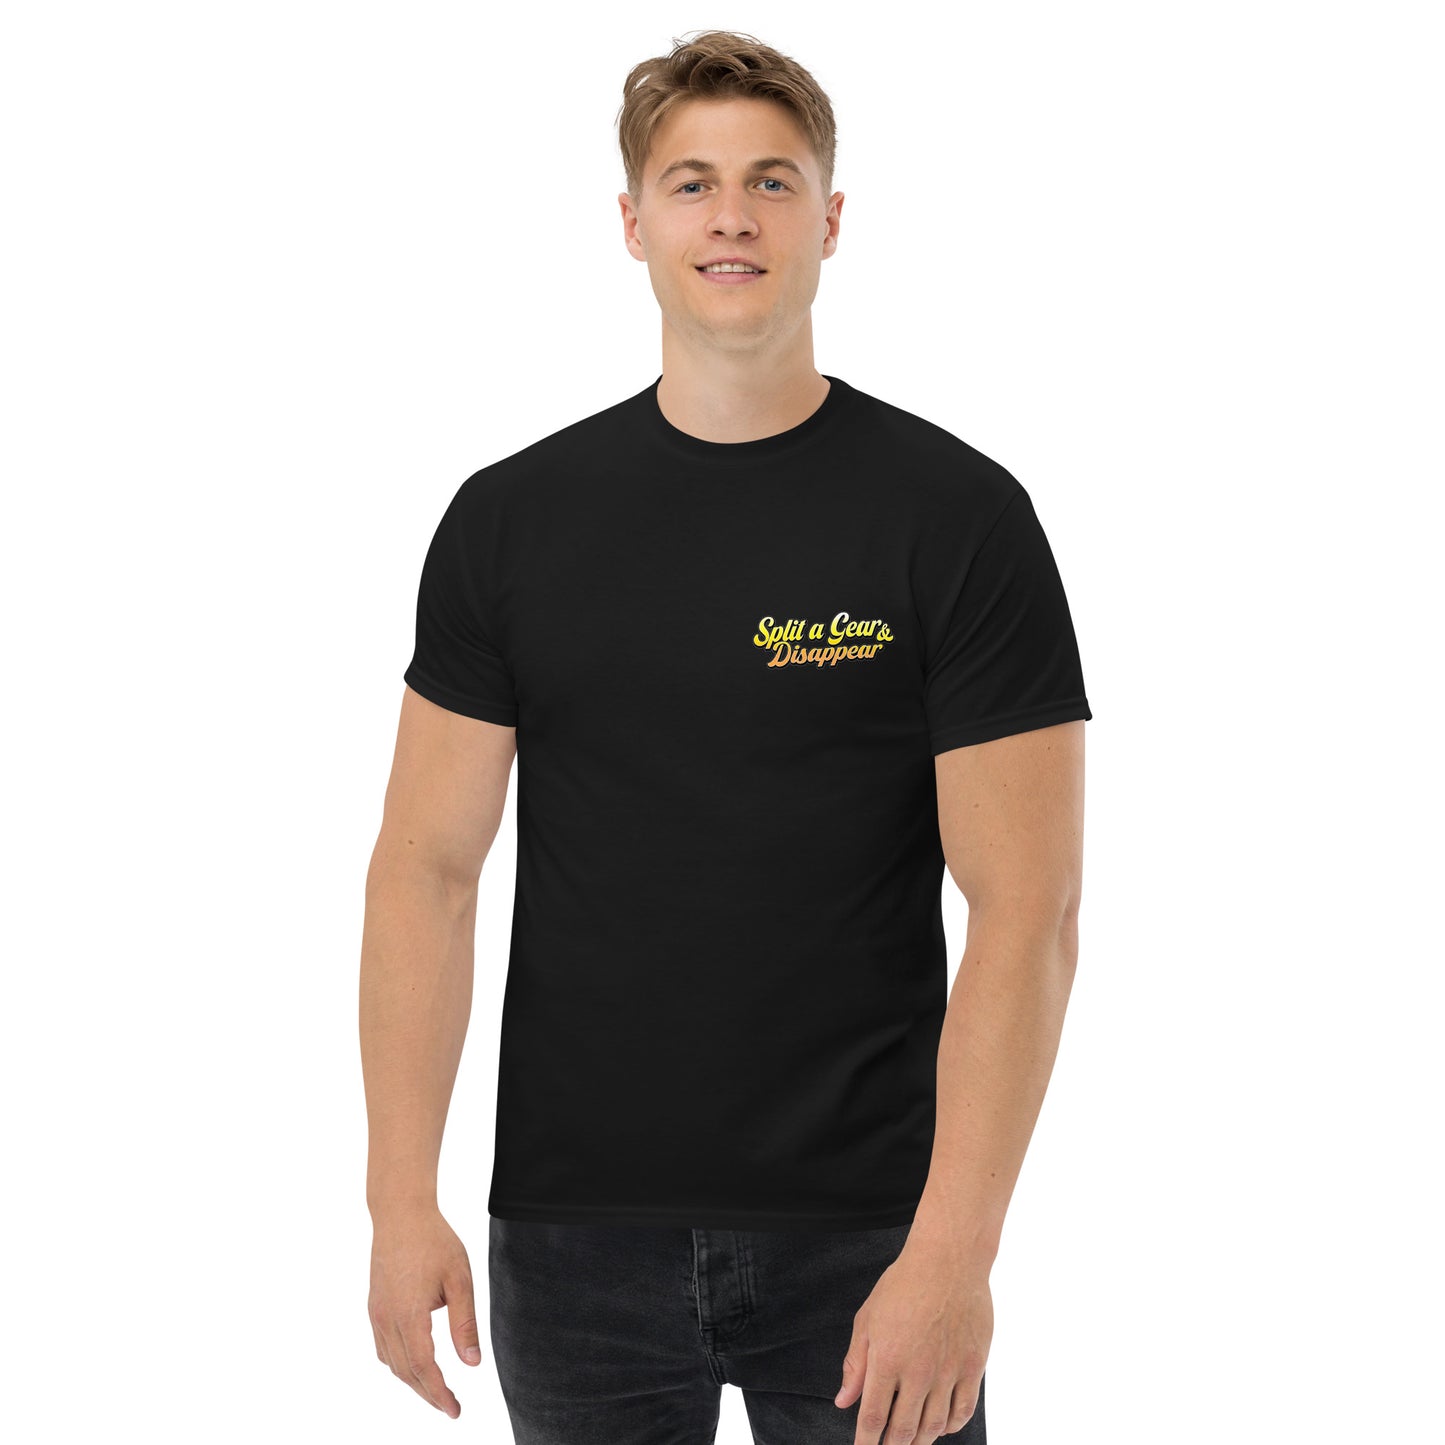 Split a gear and disappear - Tee Shirt